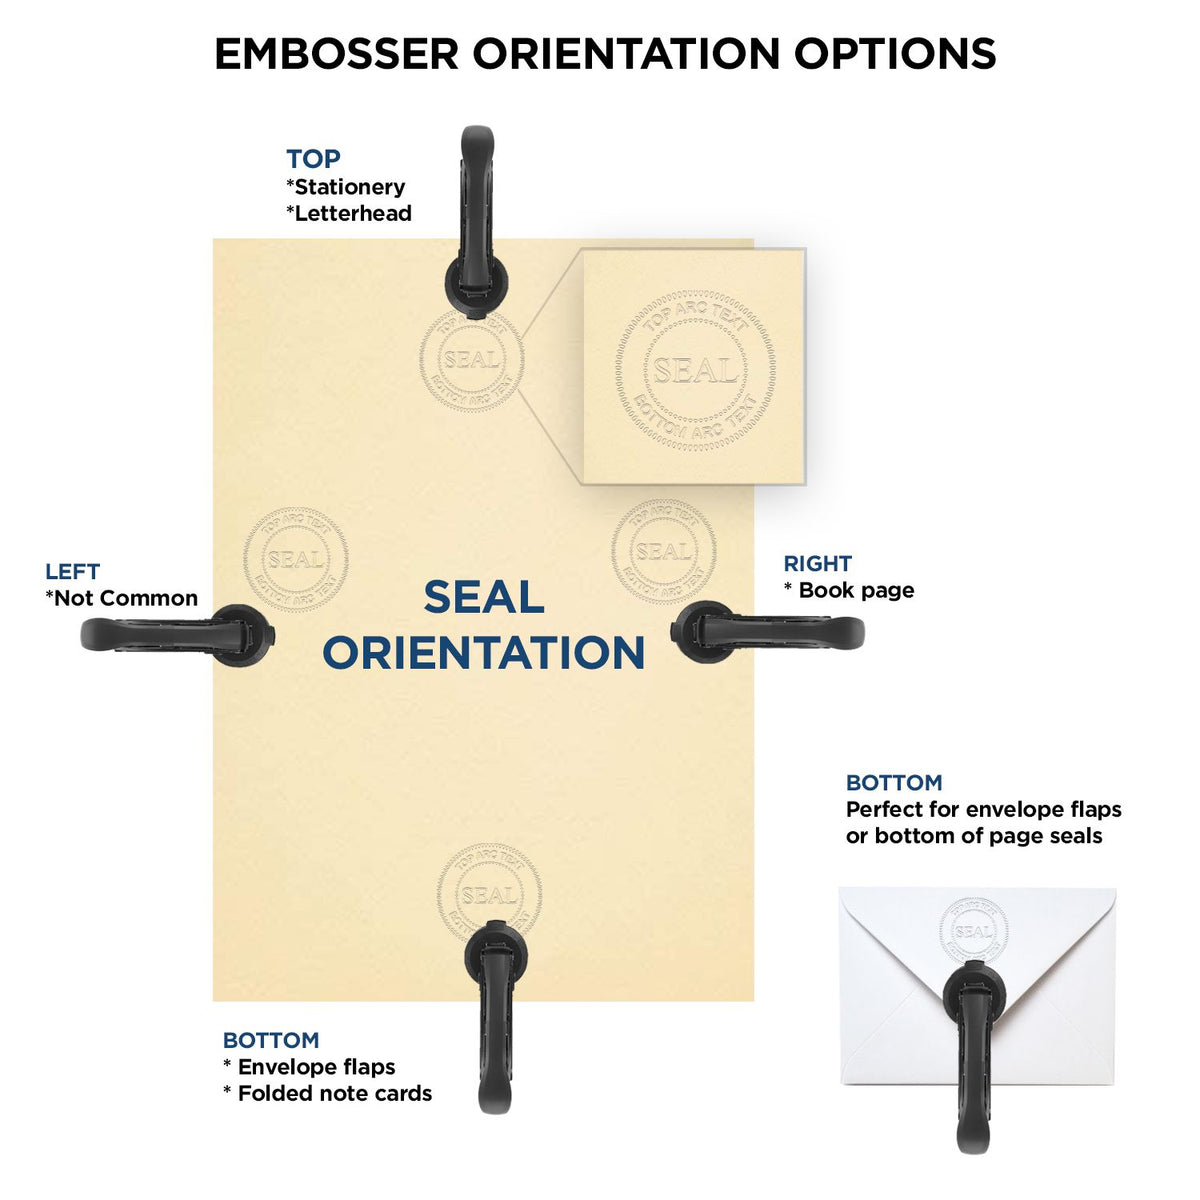 An infographic for the Georgia Engineer Desk Seal showing embosser orientation, this is showing examples of a top, bottom, right and left insert.